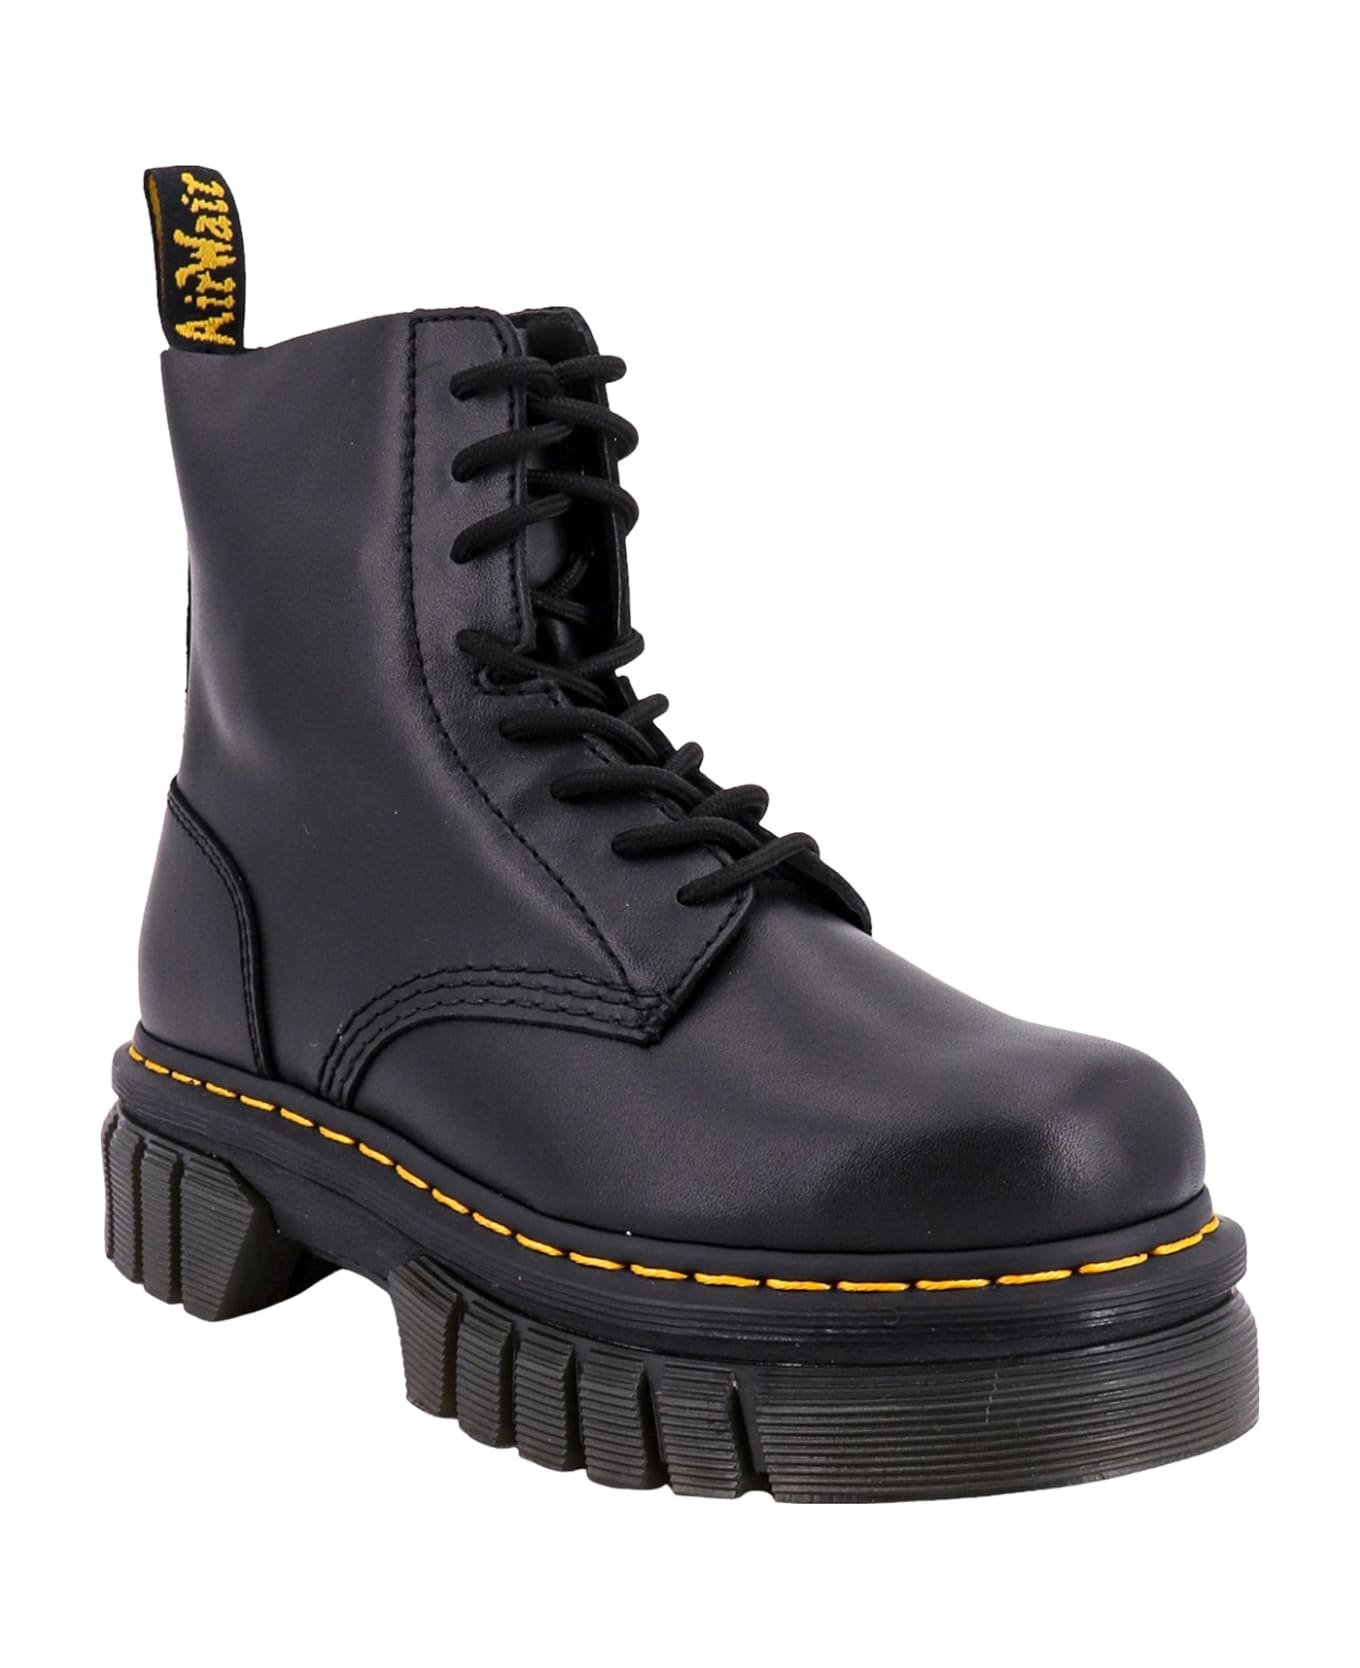 Dr. Martens Audrick 8-eye Boot Ankle Boots - black ブーツ